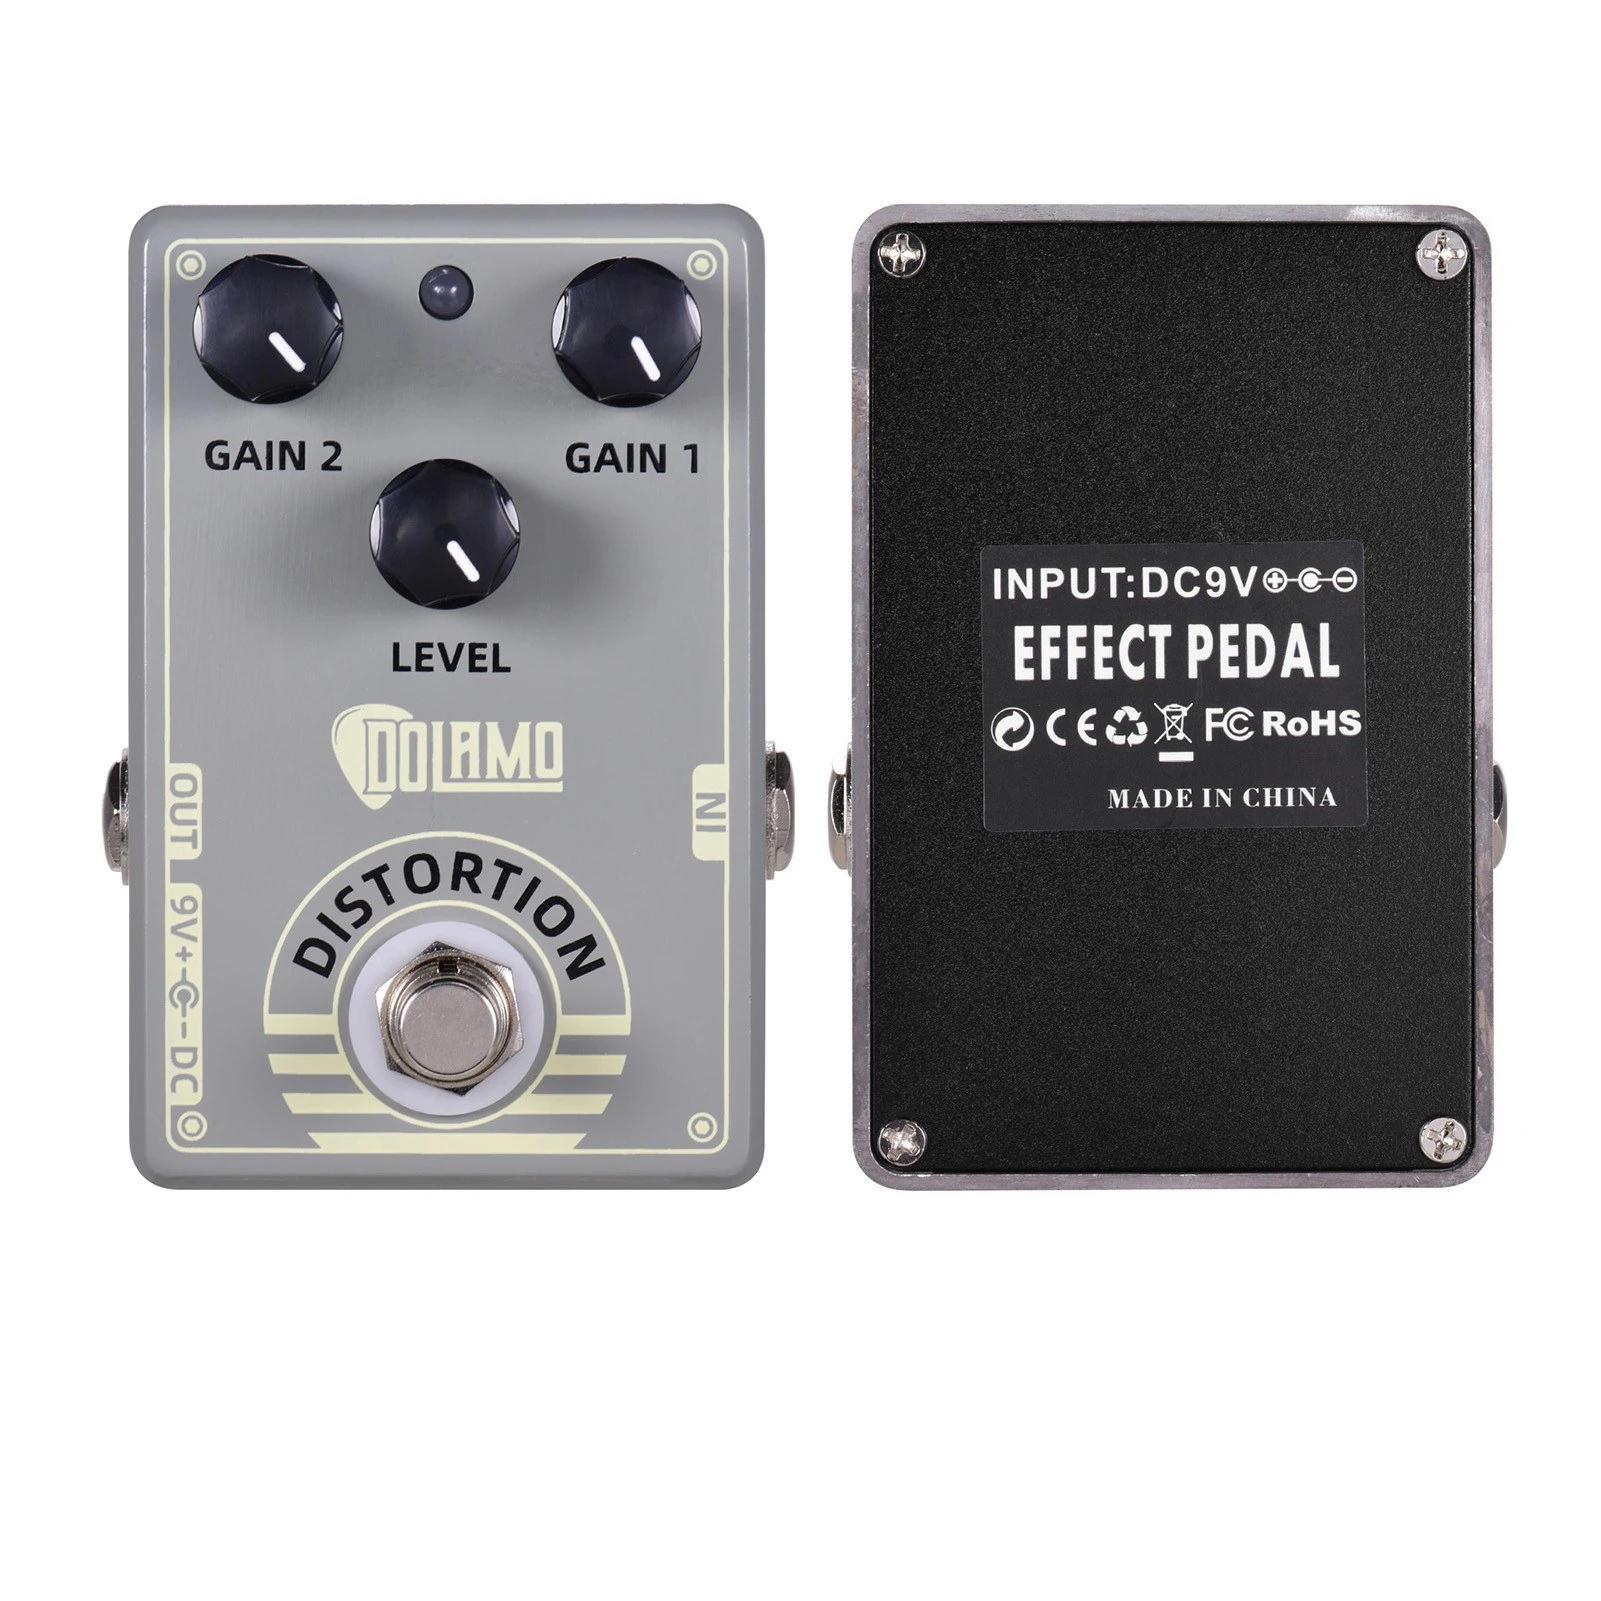 Distortion Guitar Effect Pedal with True Bypass for Electric